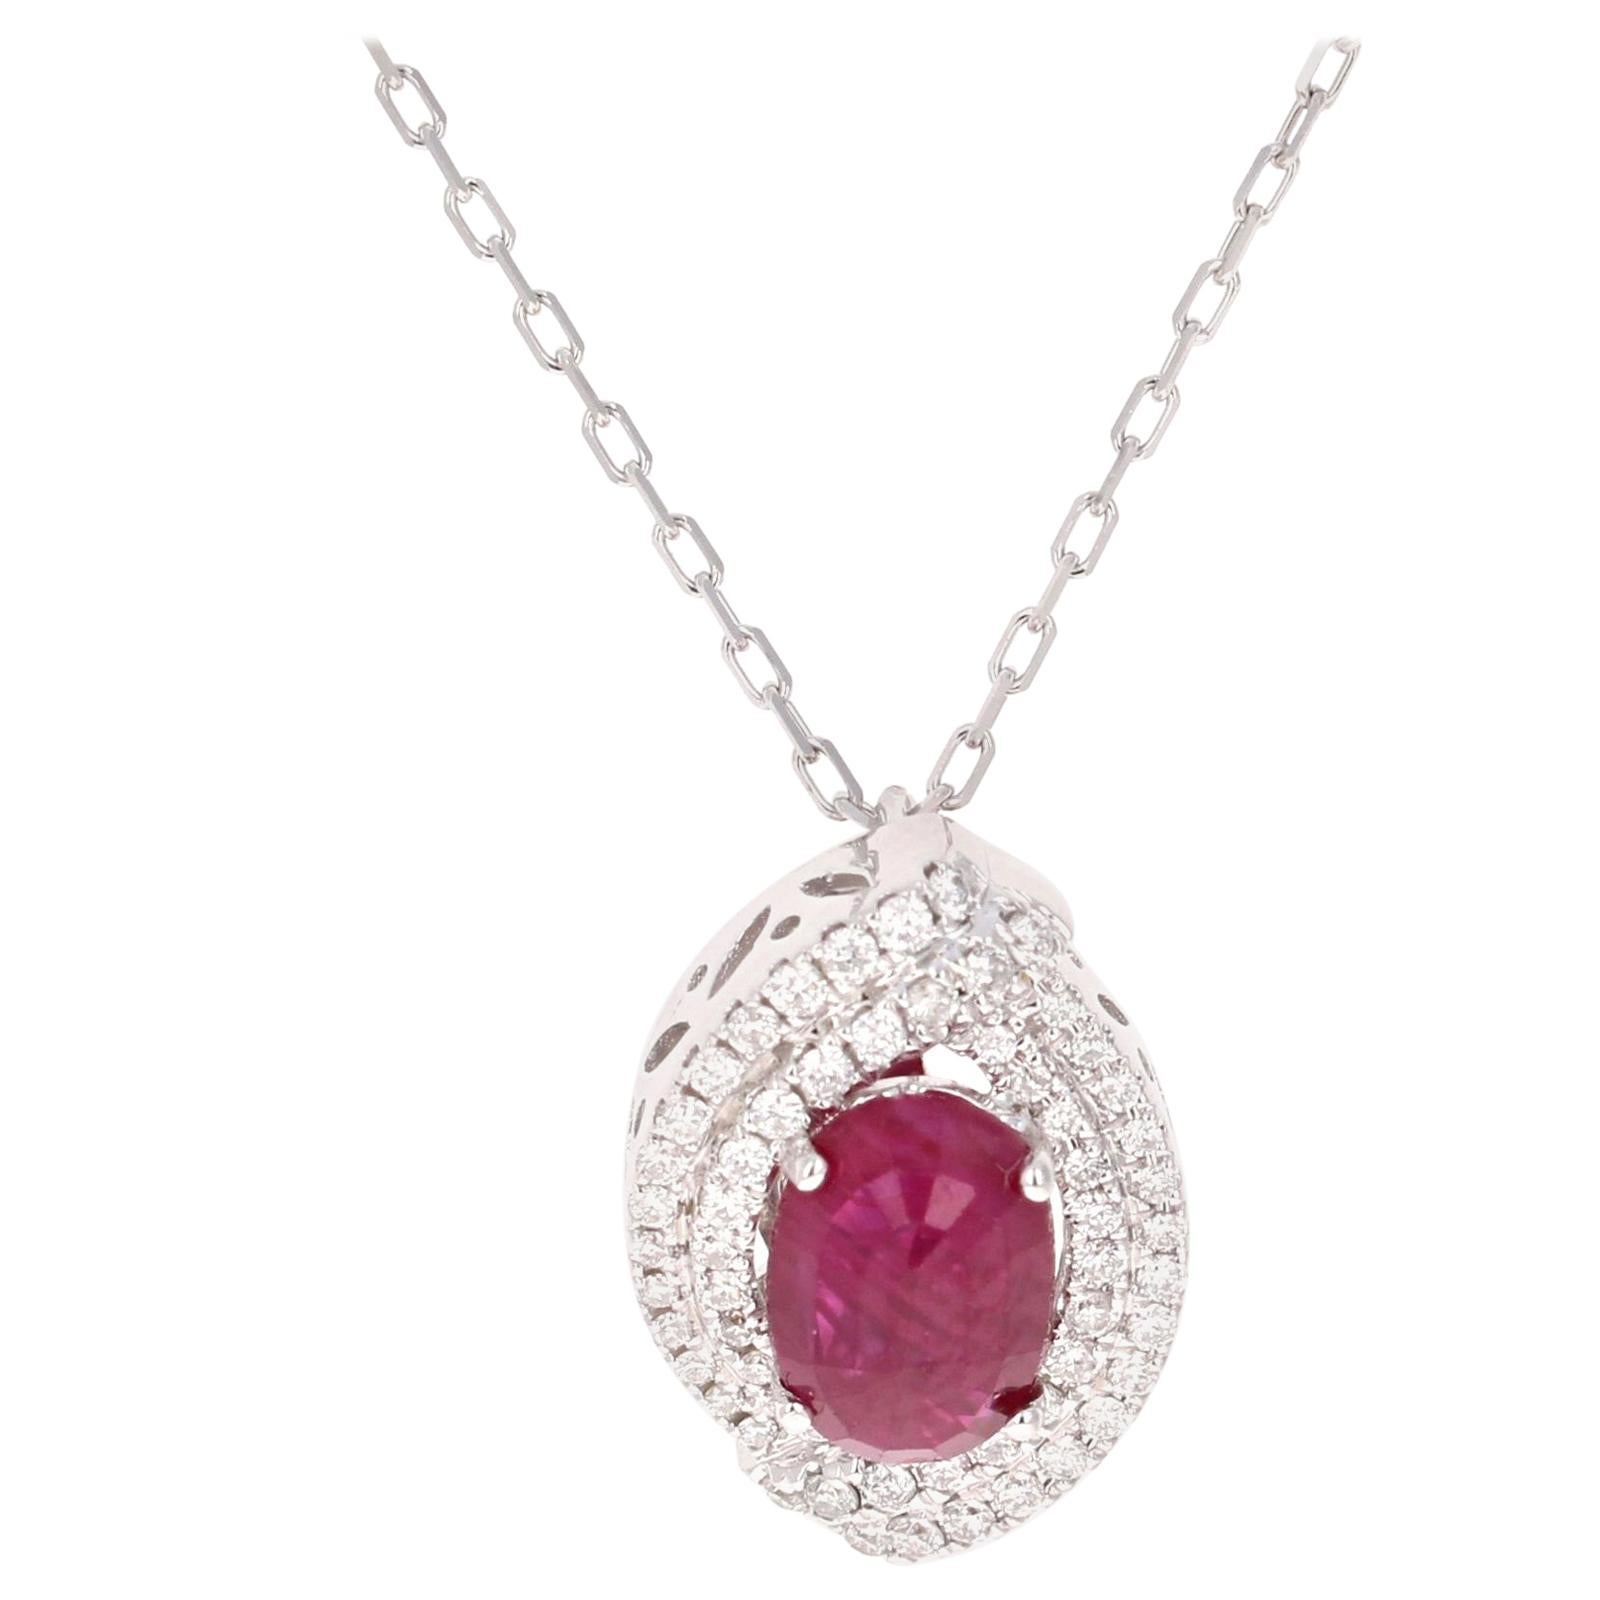 2.64 Carat Ruby Diamond White Gold Chain Necklace For Sale